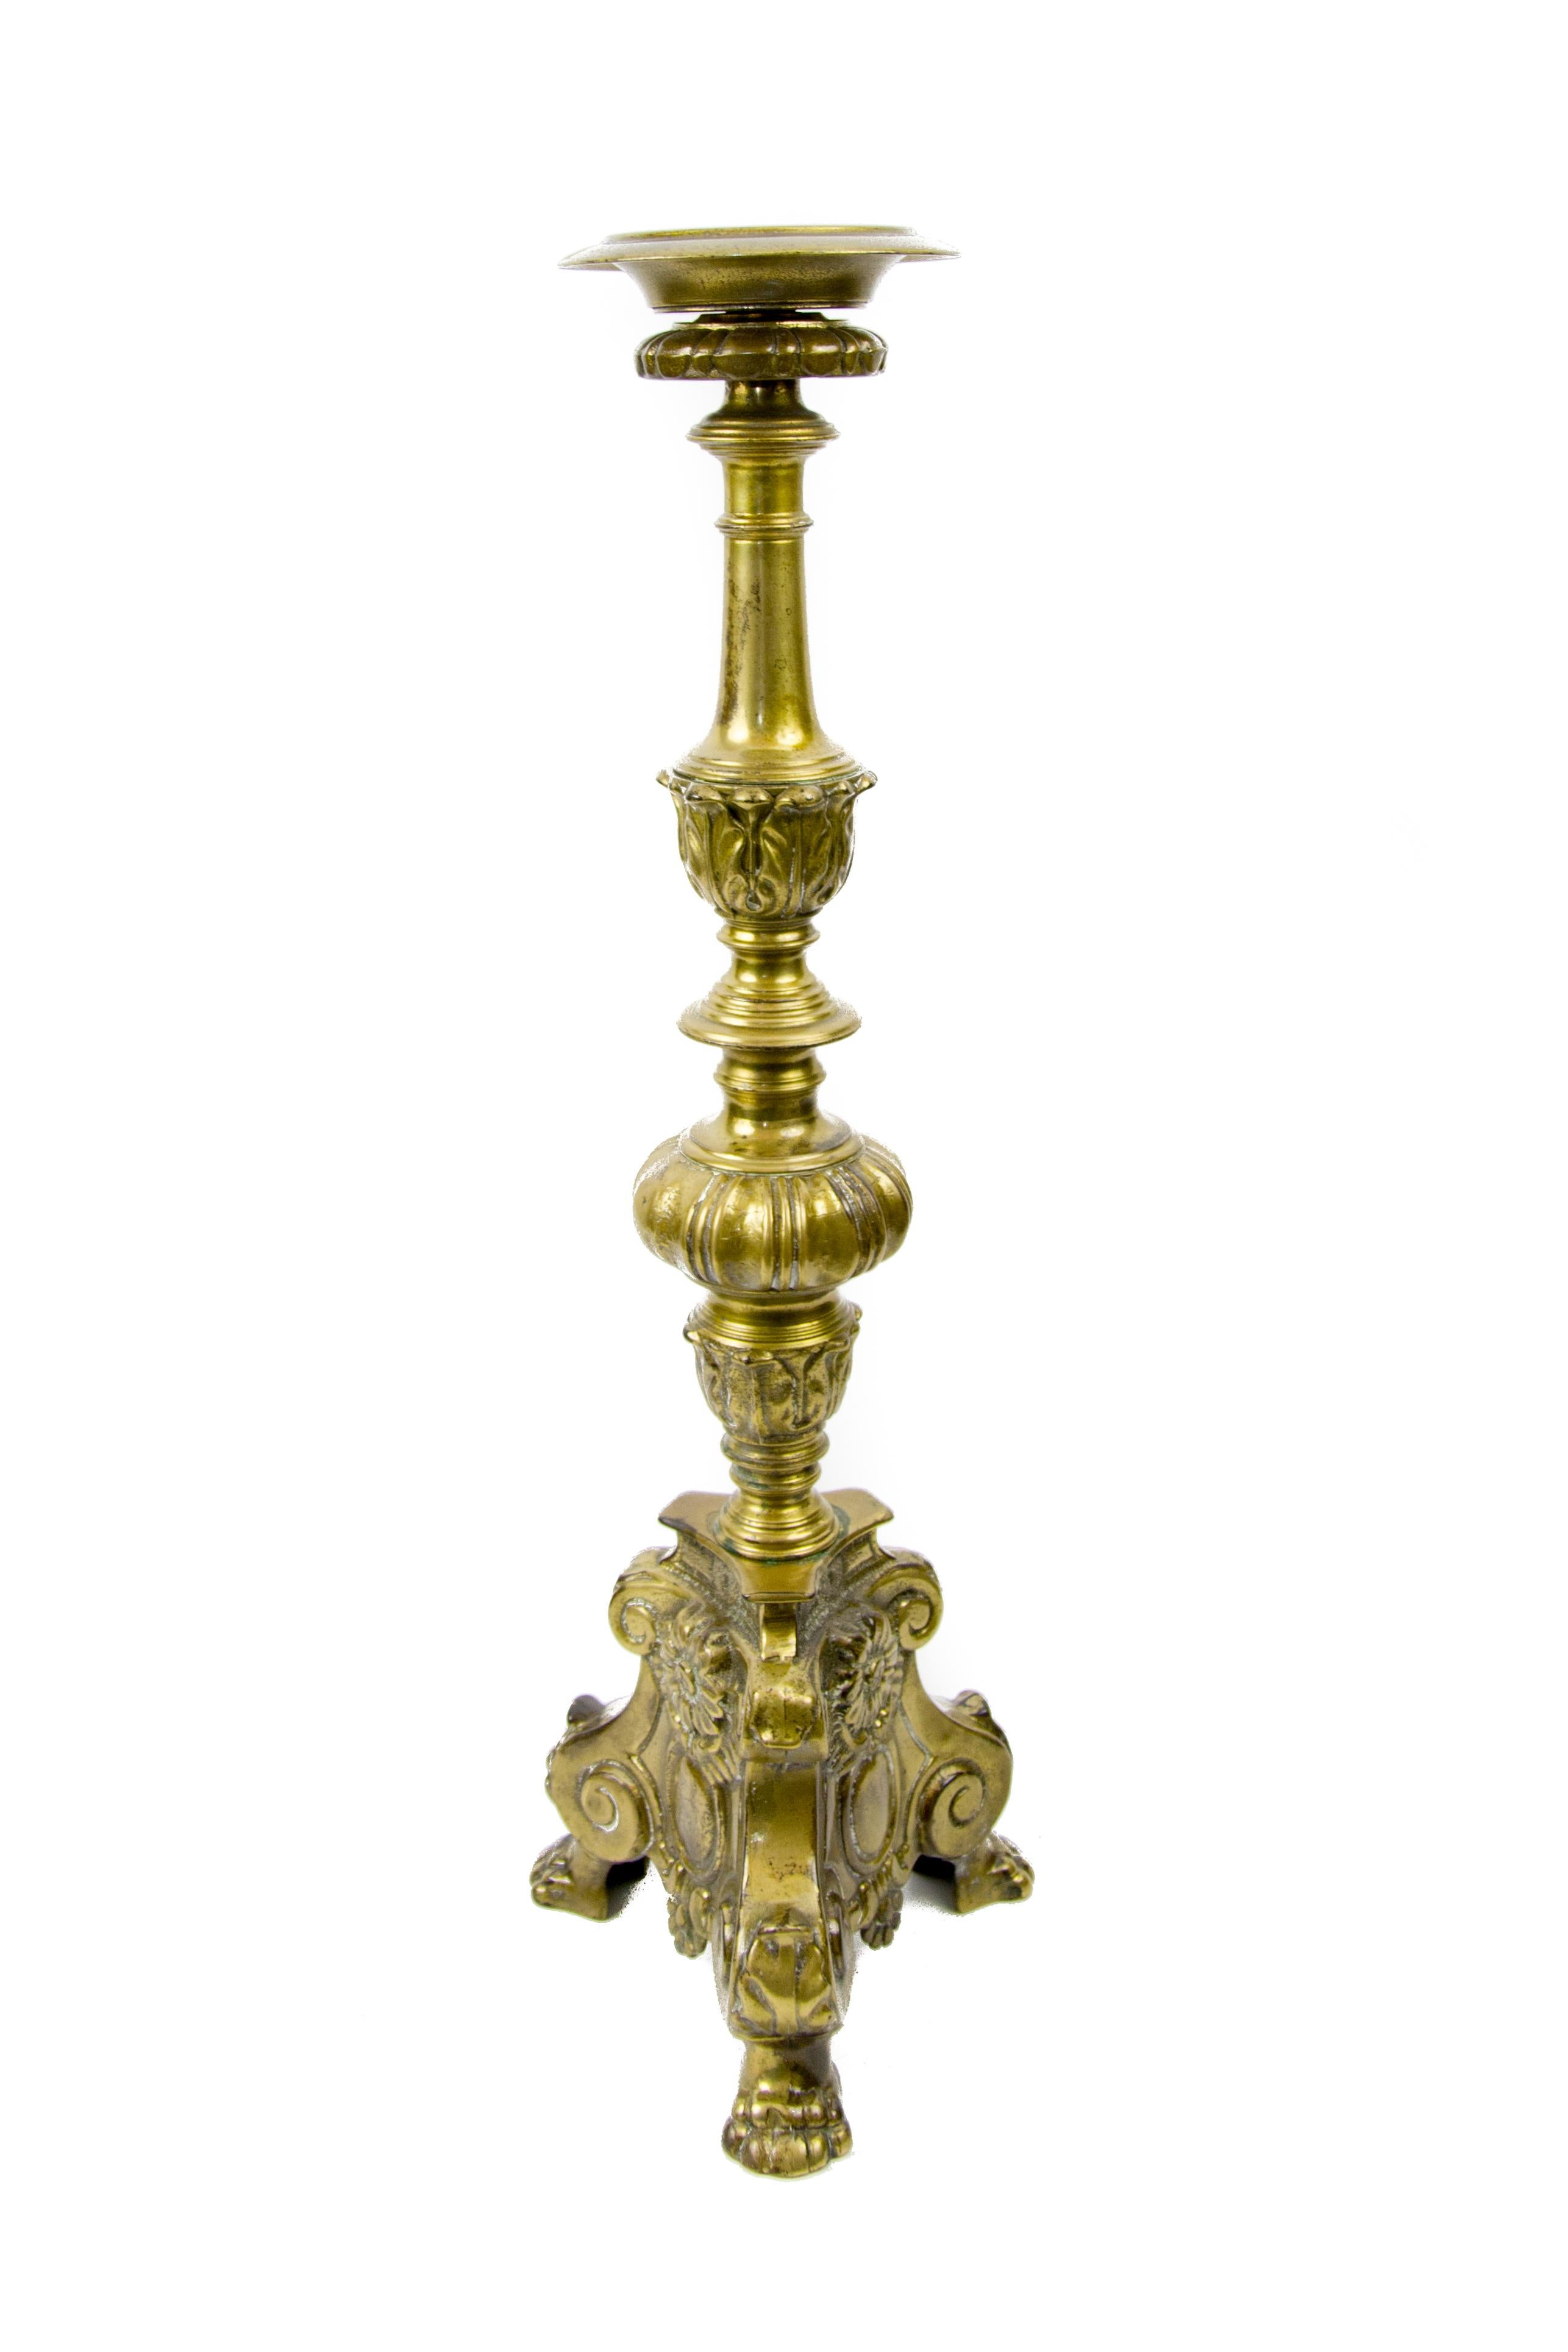 Large French Baroque candlestick on shaped triangular base with lion paw feet.
Measures: Height is 60 cm / 23.62; the base is 20 cm / 7.87 in wide; diameter of the top is 13 cm / 5.11 in.